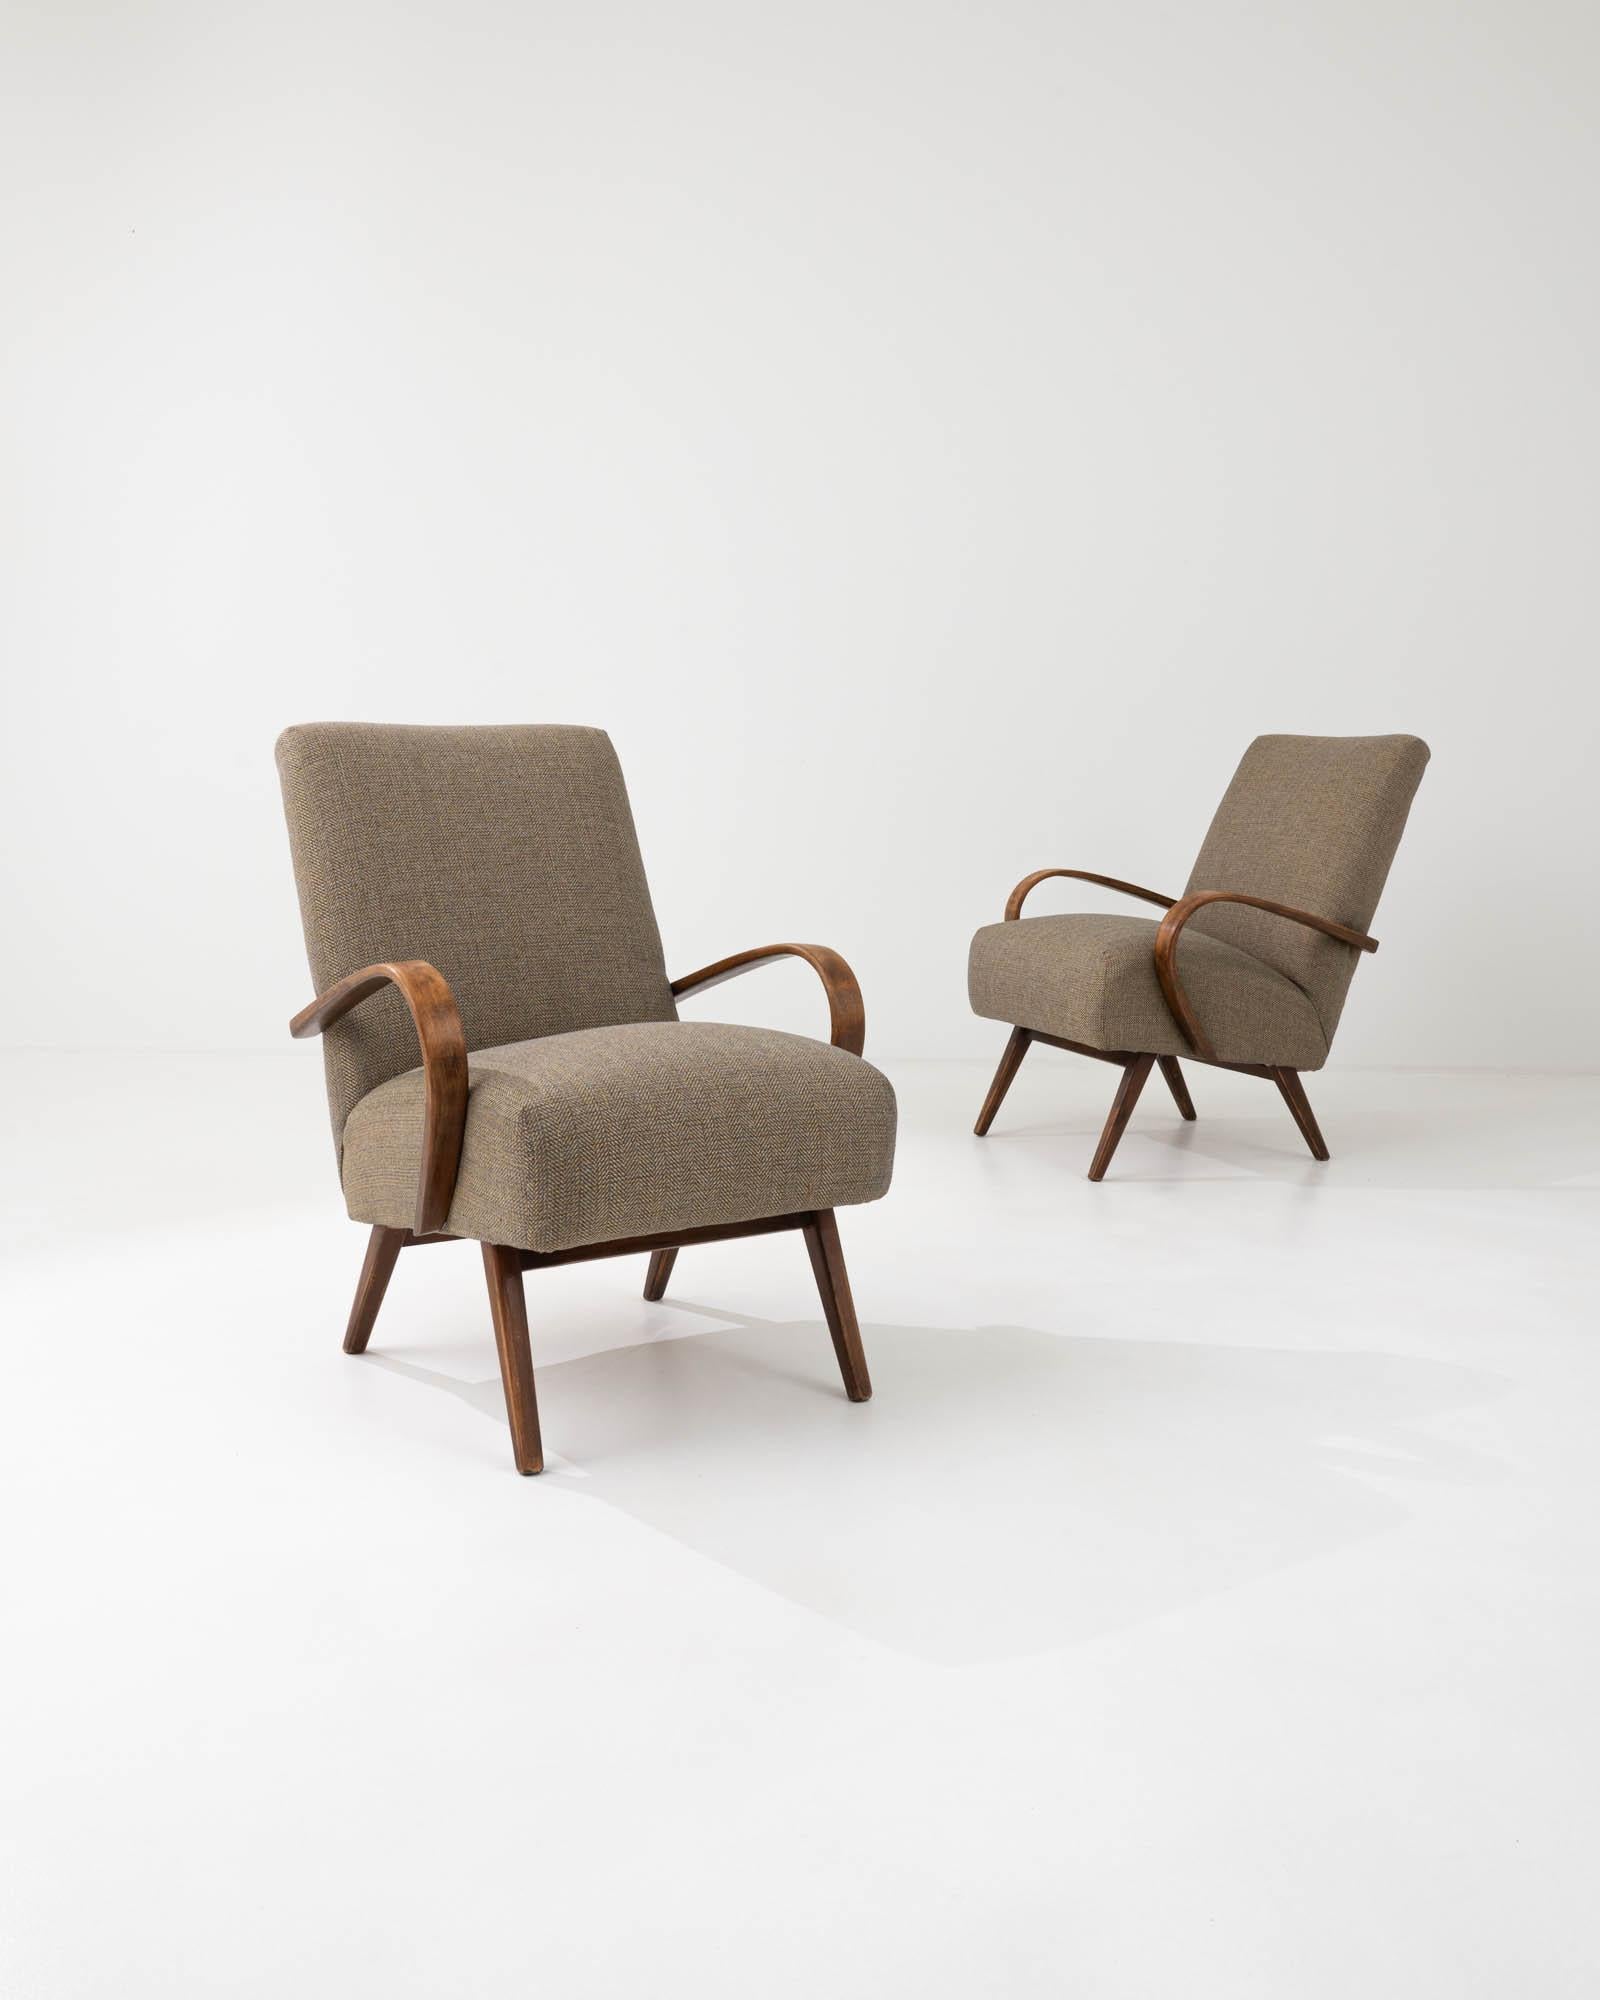 Produced in the former Czechoslovakia, this pair of bentwood armchairs from circa 1950 are re-upholstered with an updated neutral fabric. The cotton-linen blend was chosen to compliment the vintage elegance of the black hardwood frame. Comfortable